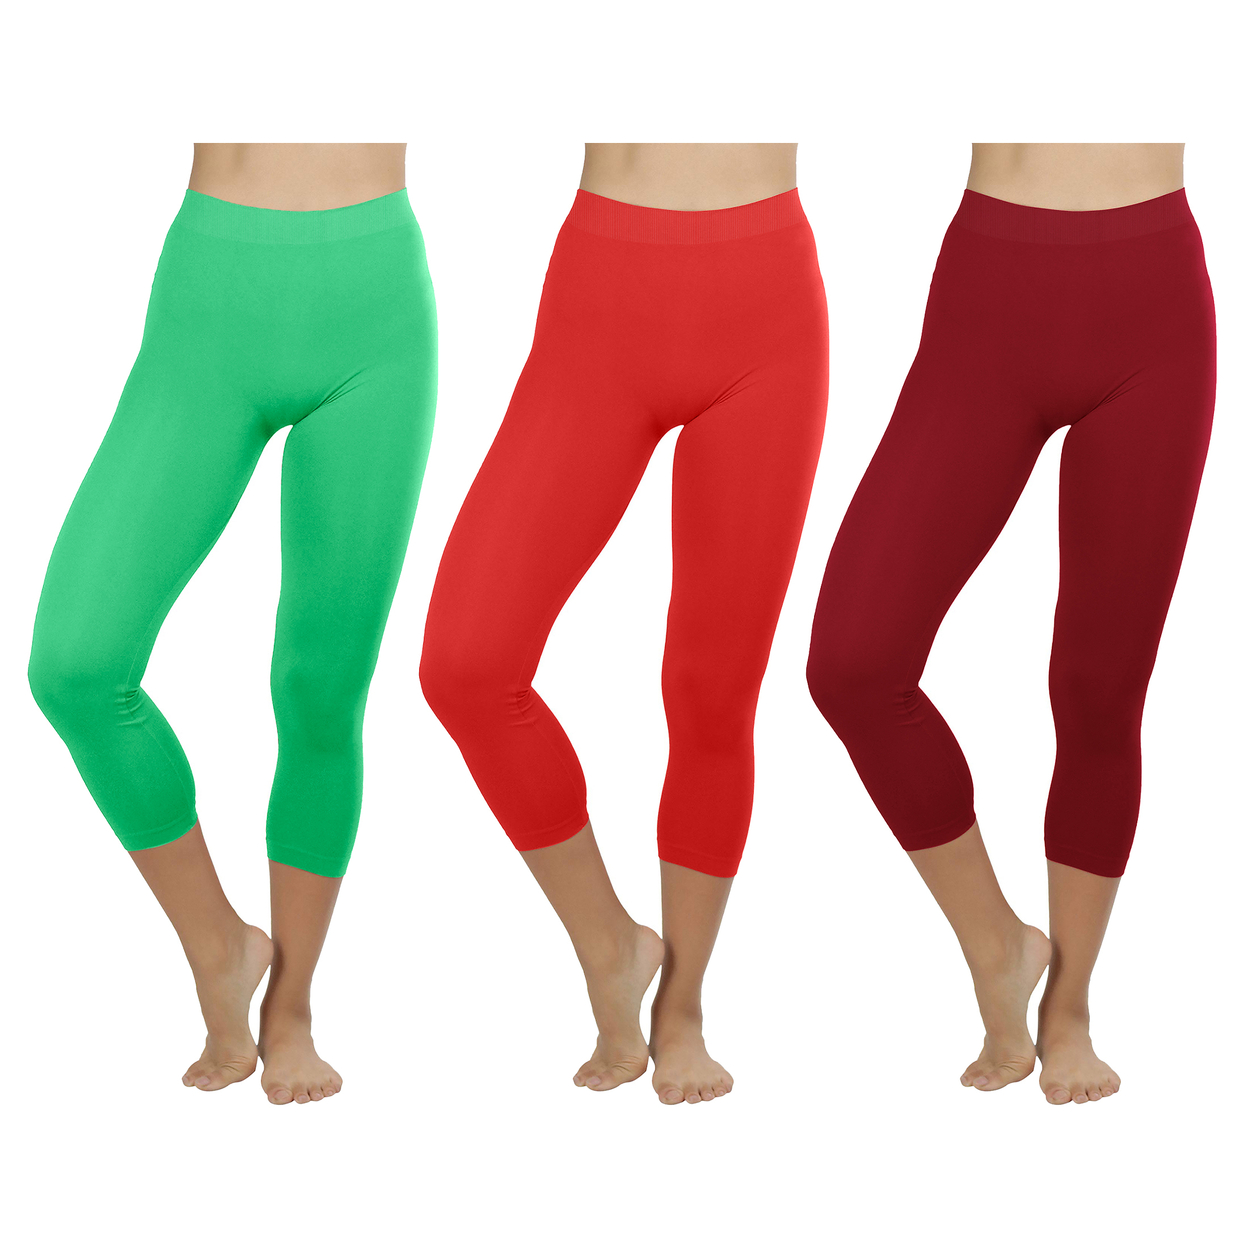 3-Pack: Women's Ultra-Soft High Waisted Smooth Stretch Active Yoga Capri Leggings - Green,red,burgundy, Small